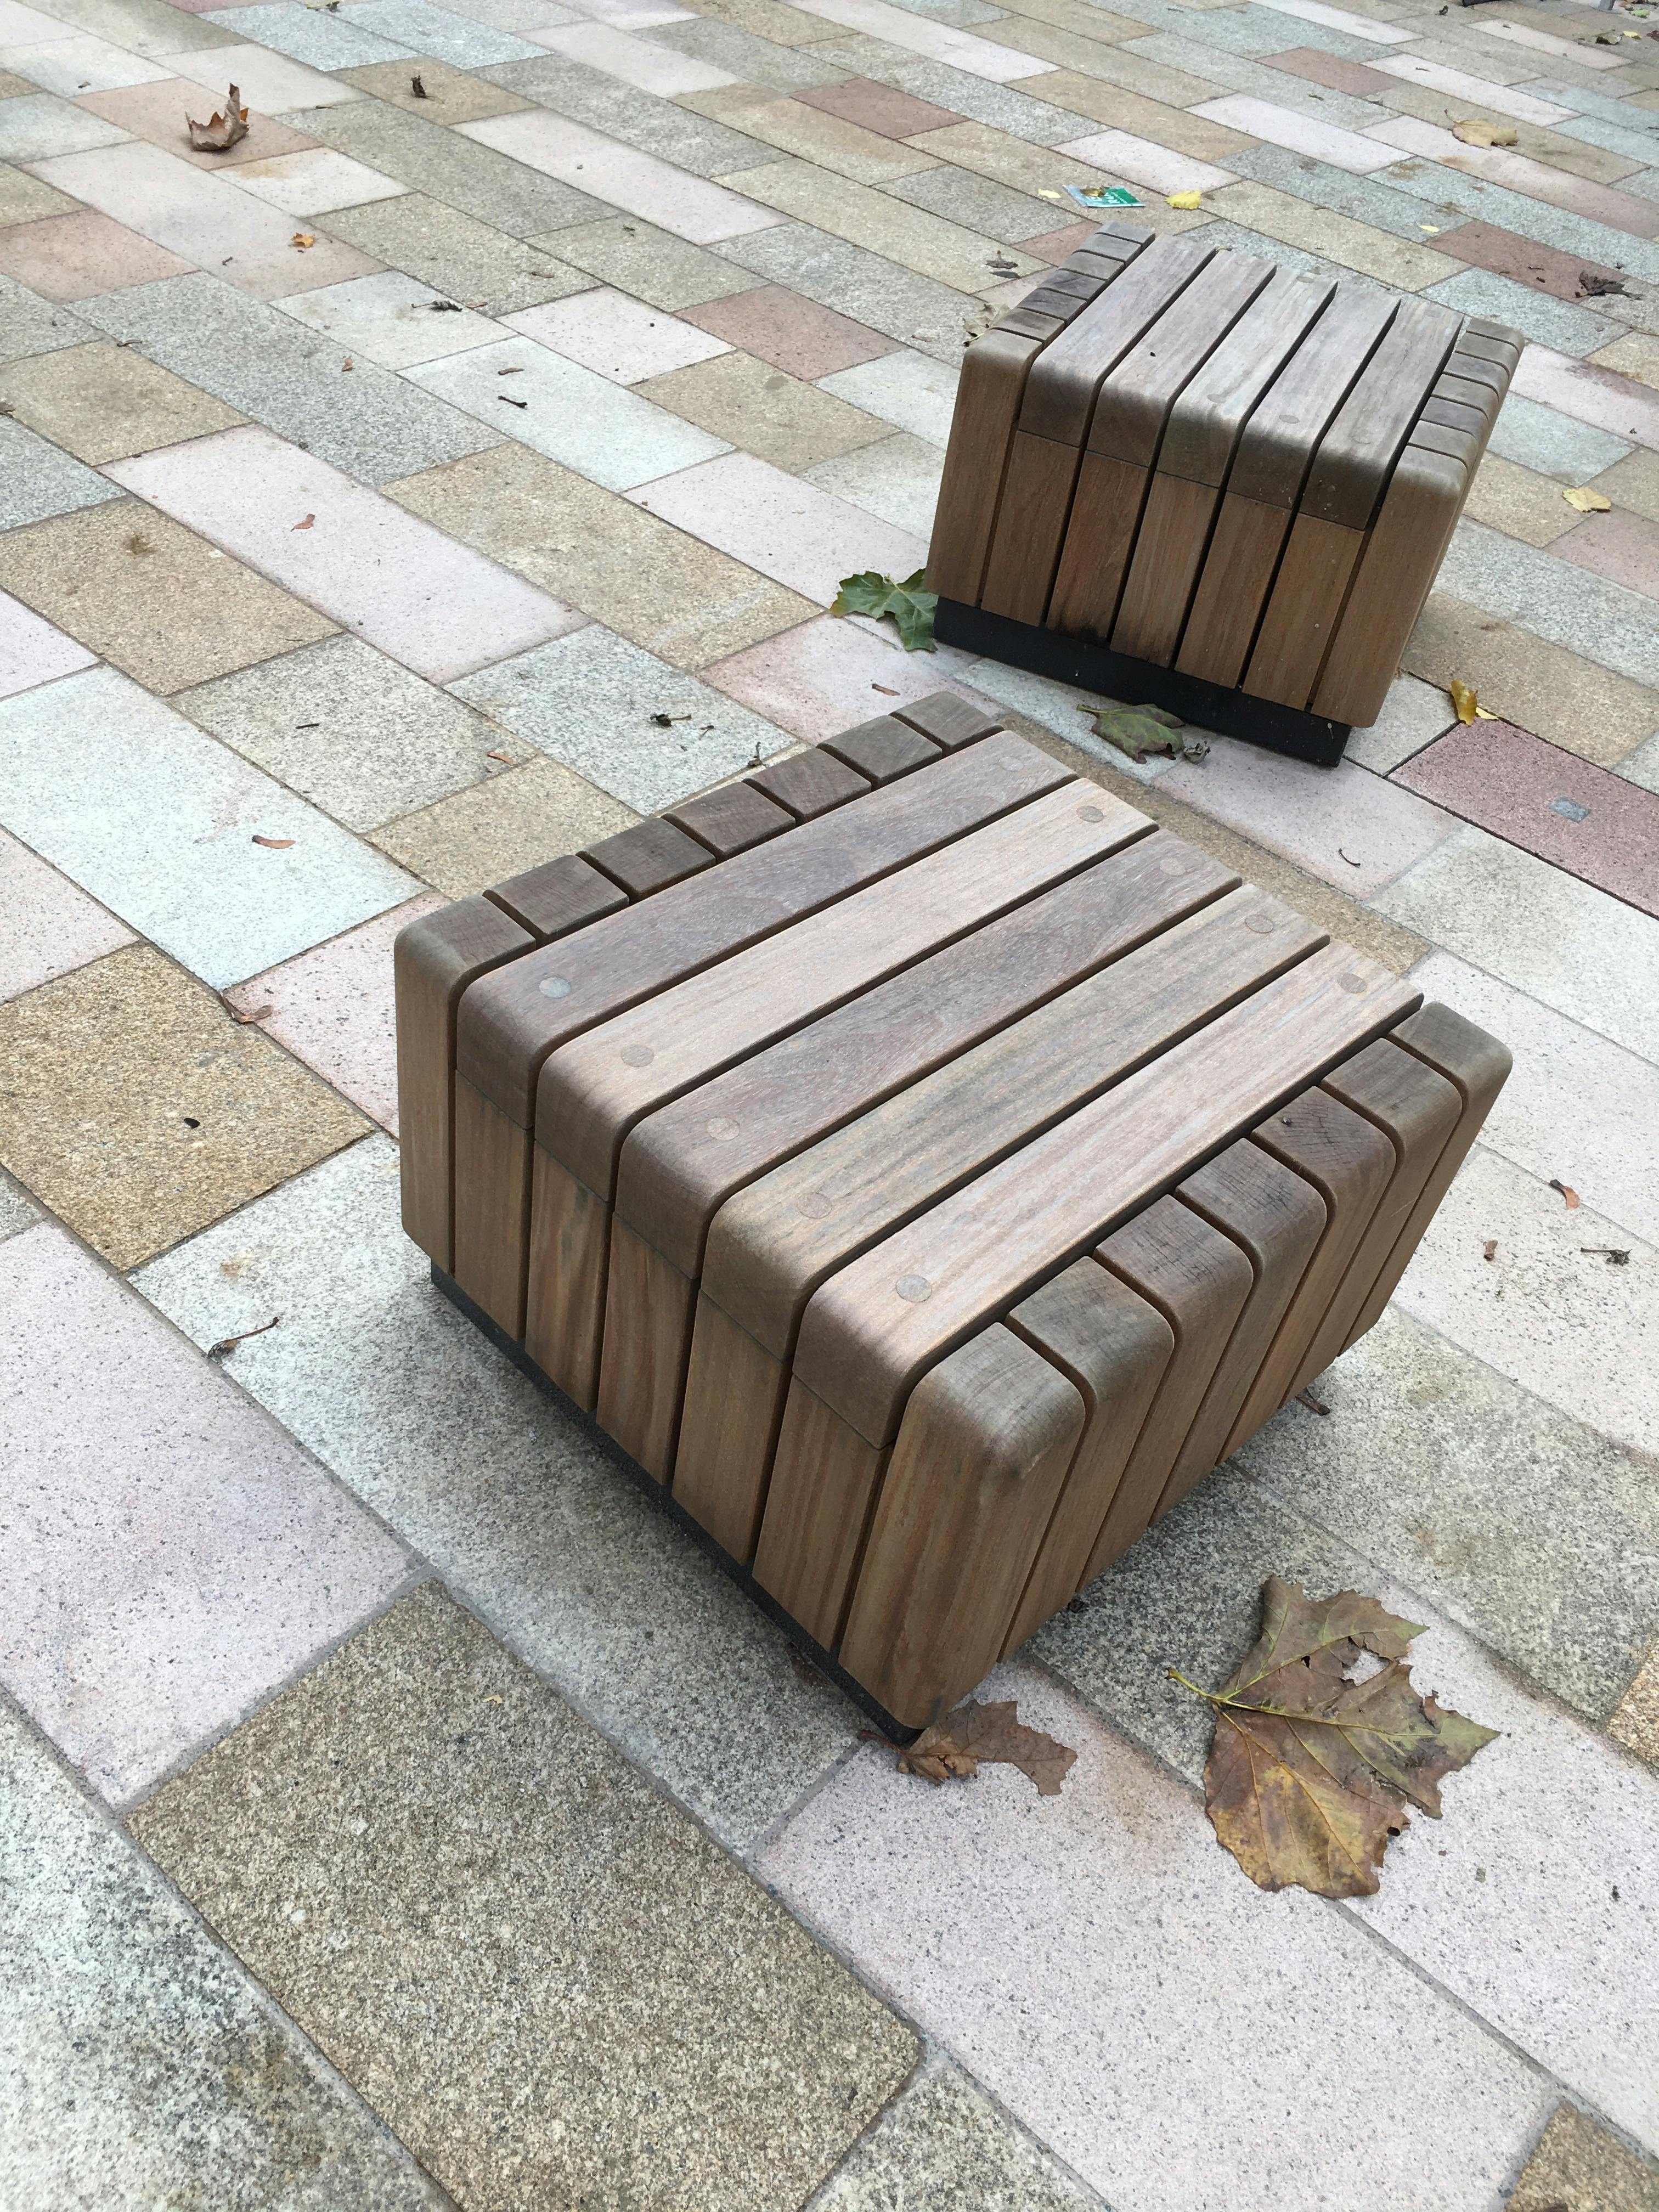 Whitfield Gardens - Moveable Cube Seats 2